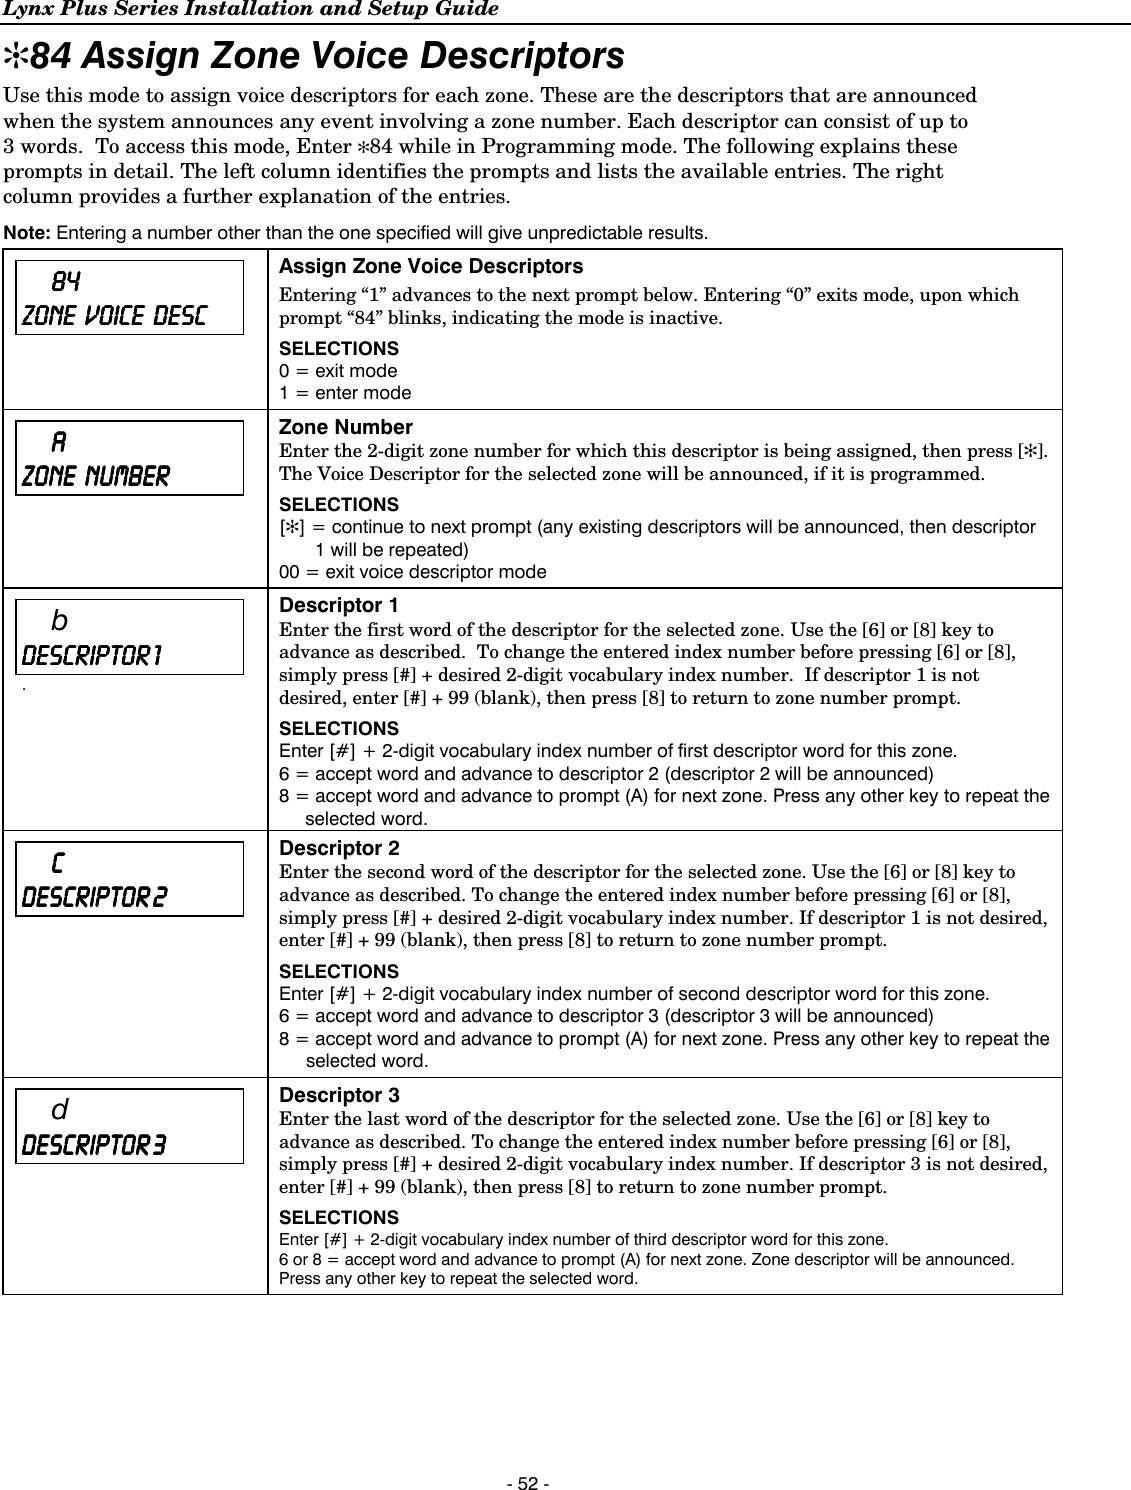 Lynx Plus Series Installation and Setup Guide  - 52 - ✻84 Assign Zone Voice Descriptors  Use this mode to assign voice descriptors for each zone. These are the descriptors that are announced when the system announces any event involving a zone number. Each descriptor can consist of up to 3 words.  To access this mode, Enter ✻84 while in Programming mode. The following explains these prompts in detail. The left column identifies the prompts and lists the available entries. The right column provides a further explanation of the entries. Note: Entering a number other than the one specified will give unpredictable results.   84848484    ZONEZONEZONEZONE         VOICE  VOICE  VOICE  VOICE         DESCDESCDESCDESC     Assign Zone Voice Descriptors Entering “1” advances to the next prompt below. Entering “0” exits mode, upon which prompt “84” blinks, indicating the mode is inactive. SELECTIONS 0 = exit mode 1 = enter mode      AAAA    ZONE ZONE ZONE ZONE         NUMBERNUMBERNUMBERNUMBER     Zone Number Enter the 2-digit zone number for which this descriptor is being assigned, then press [✻]. The Voice Descriptor for the selected zone will be announced, if it is programmed.  SELECTIONS [✻] = continue to next prompt (any existing descriptors will be announced, then descriptor 1 will be repeated) 00 = exit voice descriptor mode   b DESCRIPTOR 1DESCRIPTOR 1DESCRIPTOR 1DESCRIPTOR 1    . Descriptor 1 Enter the first word of the descriptor for the selected zone. Use the [6] or [8] key to advance as described.  To change the entered index number before pressing [6] or [8], simply press [#] + desired 2-digit vocabulary index number.  If descriptor 1 is not desired, enter [#] + 99 (blank), then press [8] to return to zone number prompt. SELECTIONS Enter [#] + 2-digit vocabulary index number of first descriptor word for this zone. 6 = accept word and advance to descriptor 2 (descriptor 2 will be announced) 8 = accept word and advance to prompt (A) for next zone. Press any other key to repeat the selected word.      CCCC    DESCRIPTOR 2DESCRIPTOR 2DESCRIPTOR 2DESCRIPTOR 2     Descriptor 2 Enter the second word of the descriptor for the selected zone. Use the [6] or [8] key to advance as described. To change the entered index number before pressing [6] or [8], simply press [#] + desired 2-digit vocabulary index number. If descriptor 1 is not desired, enter [#] + 99 (blank), then press [8] to return to zone number prompt. SELECTIONS Enter [#] + 2-digit vocabulary index number of second descriptor word for this zone. 6 = accept word and advance to descriptor 3 (descriptor 3 will be announced) 8 = accept word and advance to prompt (A) for next zone. Press any other key to repeat the selected word.   d DESCRIPTOR 3DESCRIPTOR 3DESCRIPTOR 3DESCRIPTOR 3     Descriptor 3 Enter the last word of the descriptor for the selected zone. Use the [6] or [8] key to advance as described. To change the entered index number before pressing [6] or [8], simply press [#] + desired 2-digit vocabulary index number. If descriptor 3 is not desired, enter [#] + 99 (blank), then press [8] to return to zone number prompt. SELECTIONS Enter [#] + 2-digit vocabulary index number of third descriptor word for this zone. 6 or 8 = accept word and advance to prompt (A) for next zone. Zone descriptor will be announced. Press any other key to repeat the selected word.  